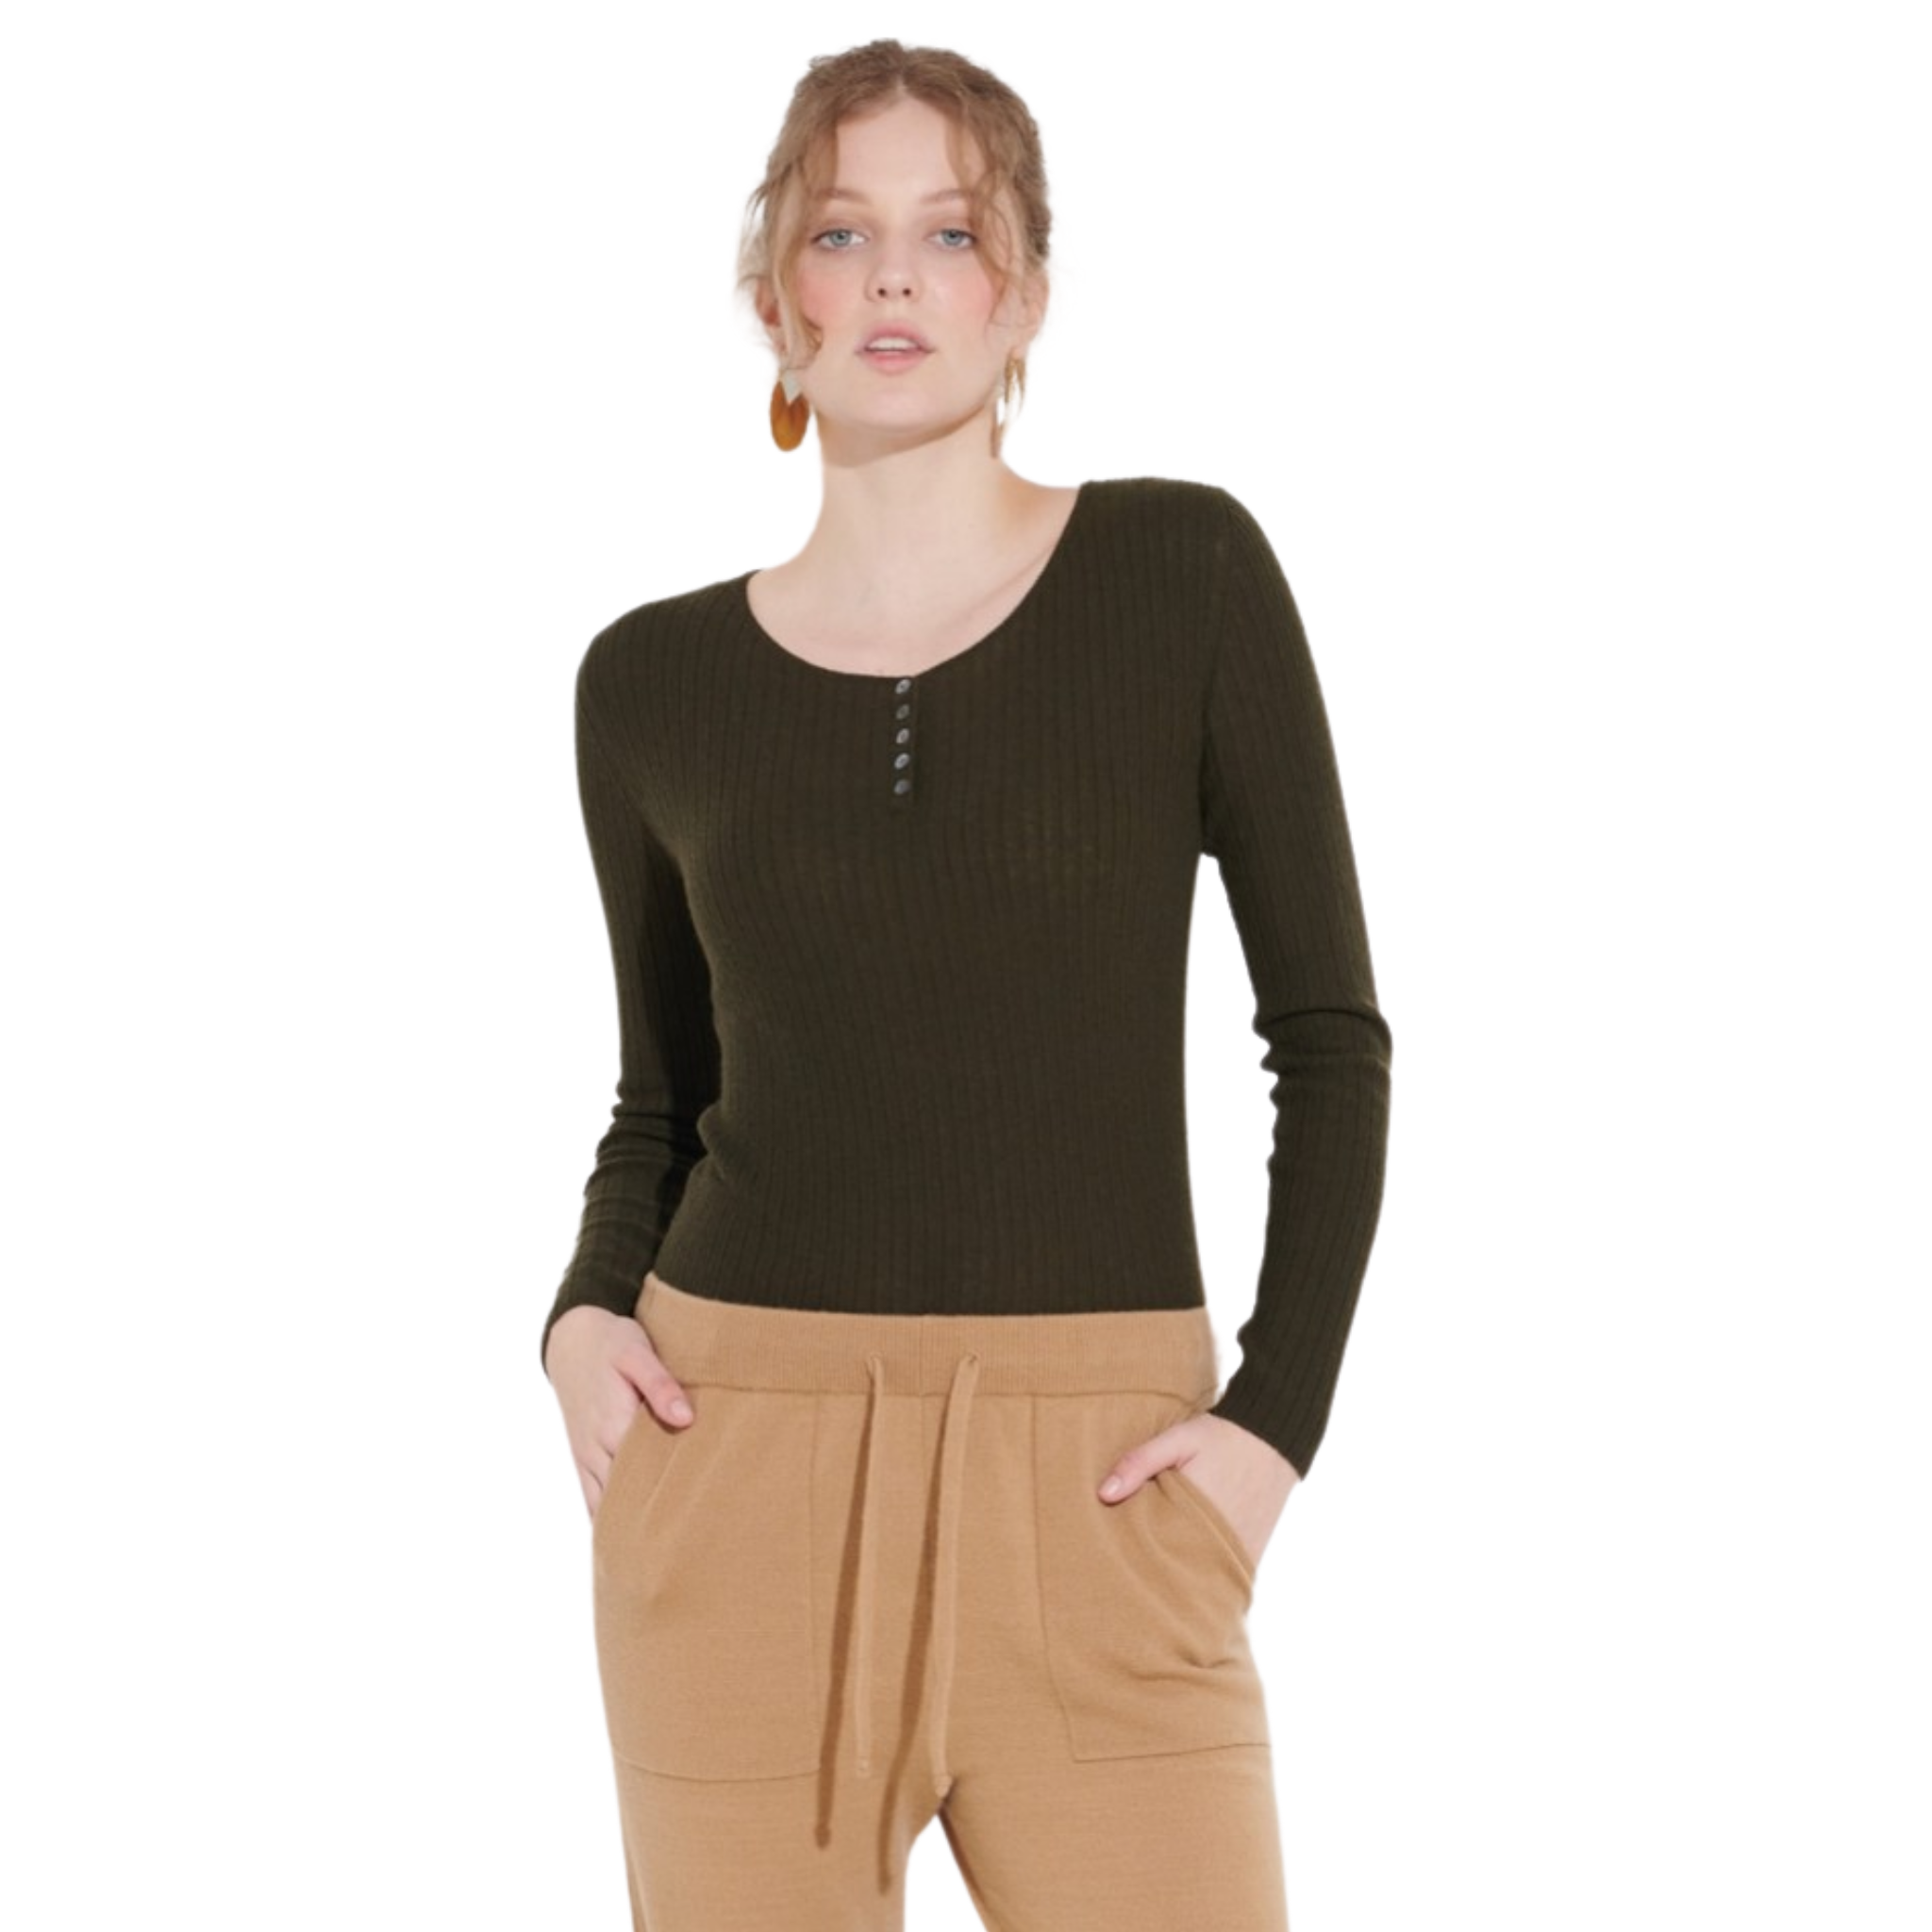 Cashmerism 100% Cashmere Long Sleeve Henly Top